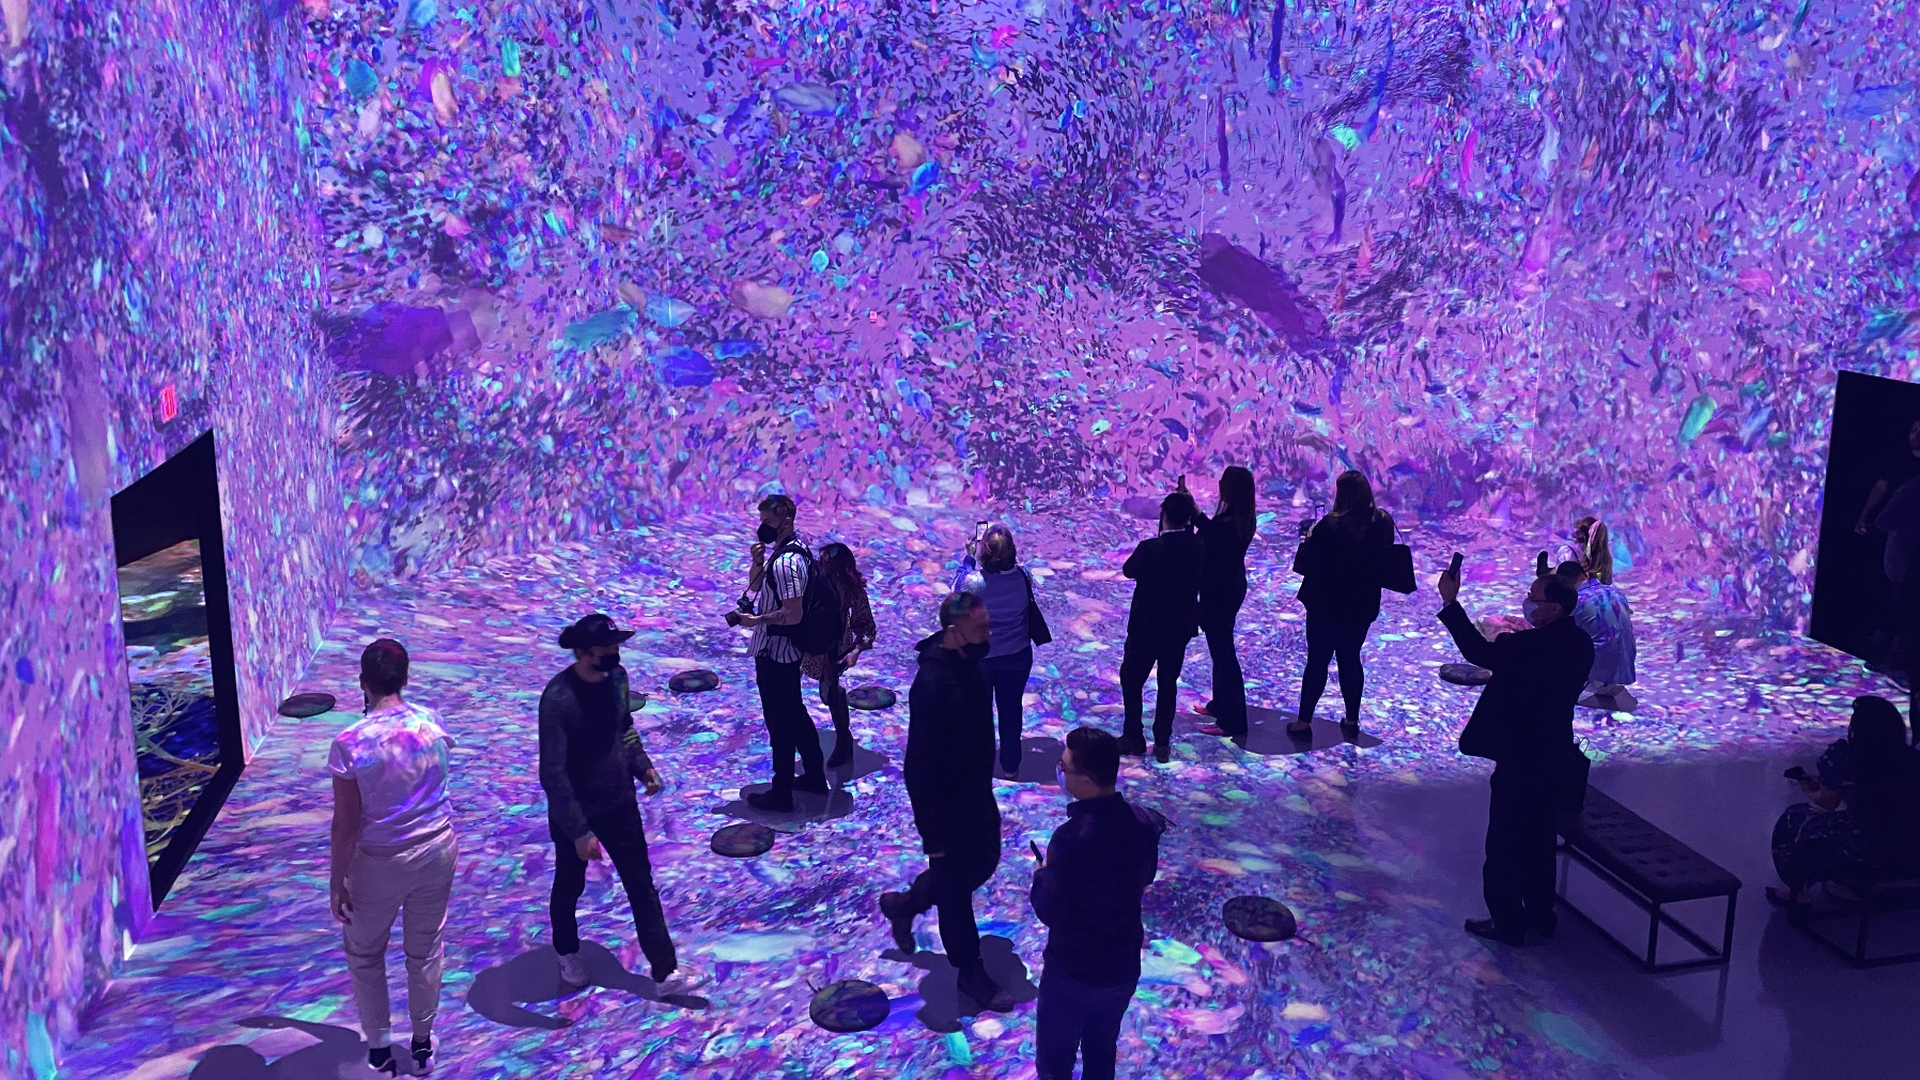 An immersive digital cherry blossom experience. 